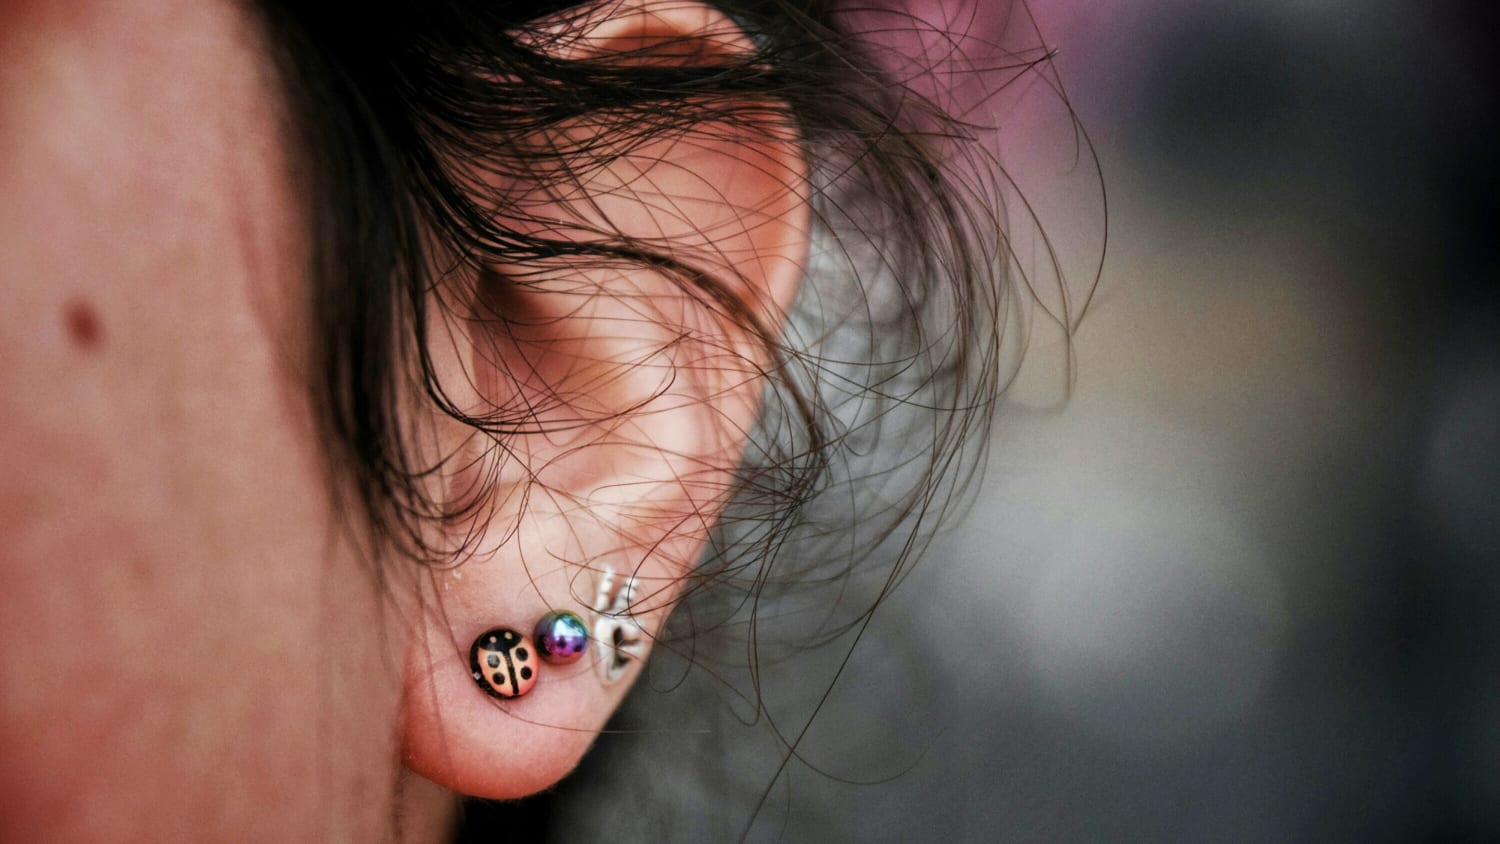 Infected ear piercing: Symptoms, treatment, and prevention